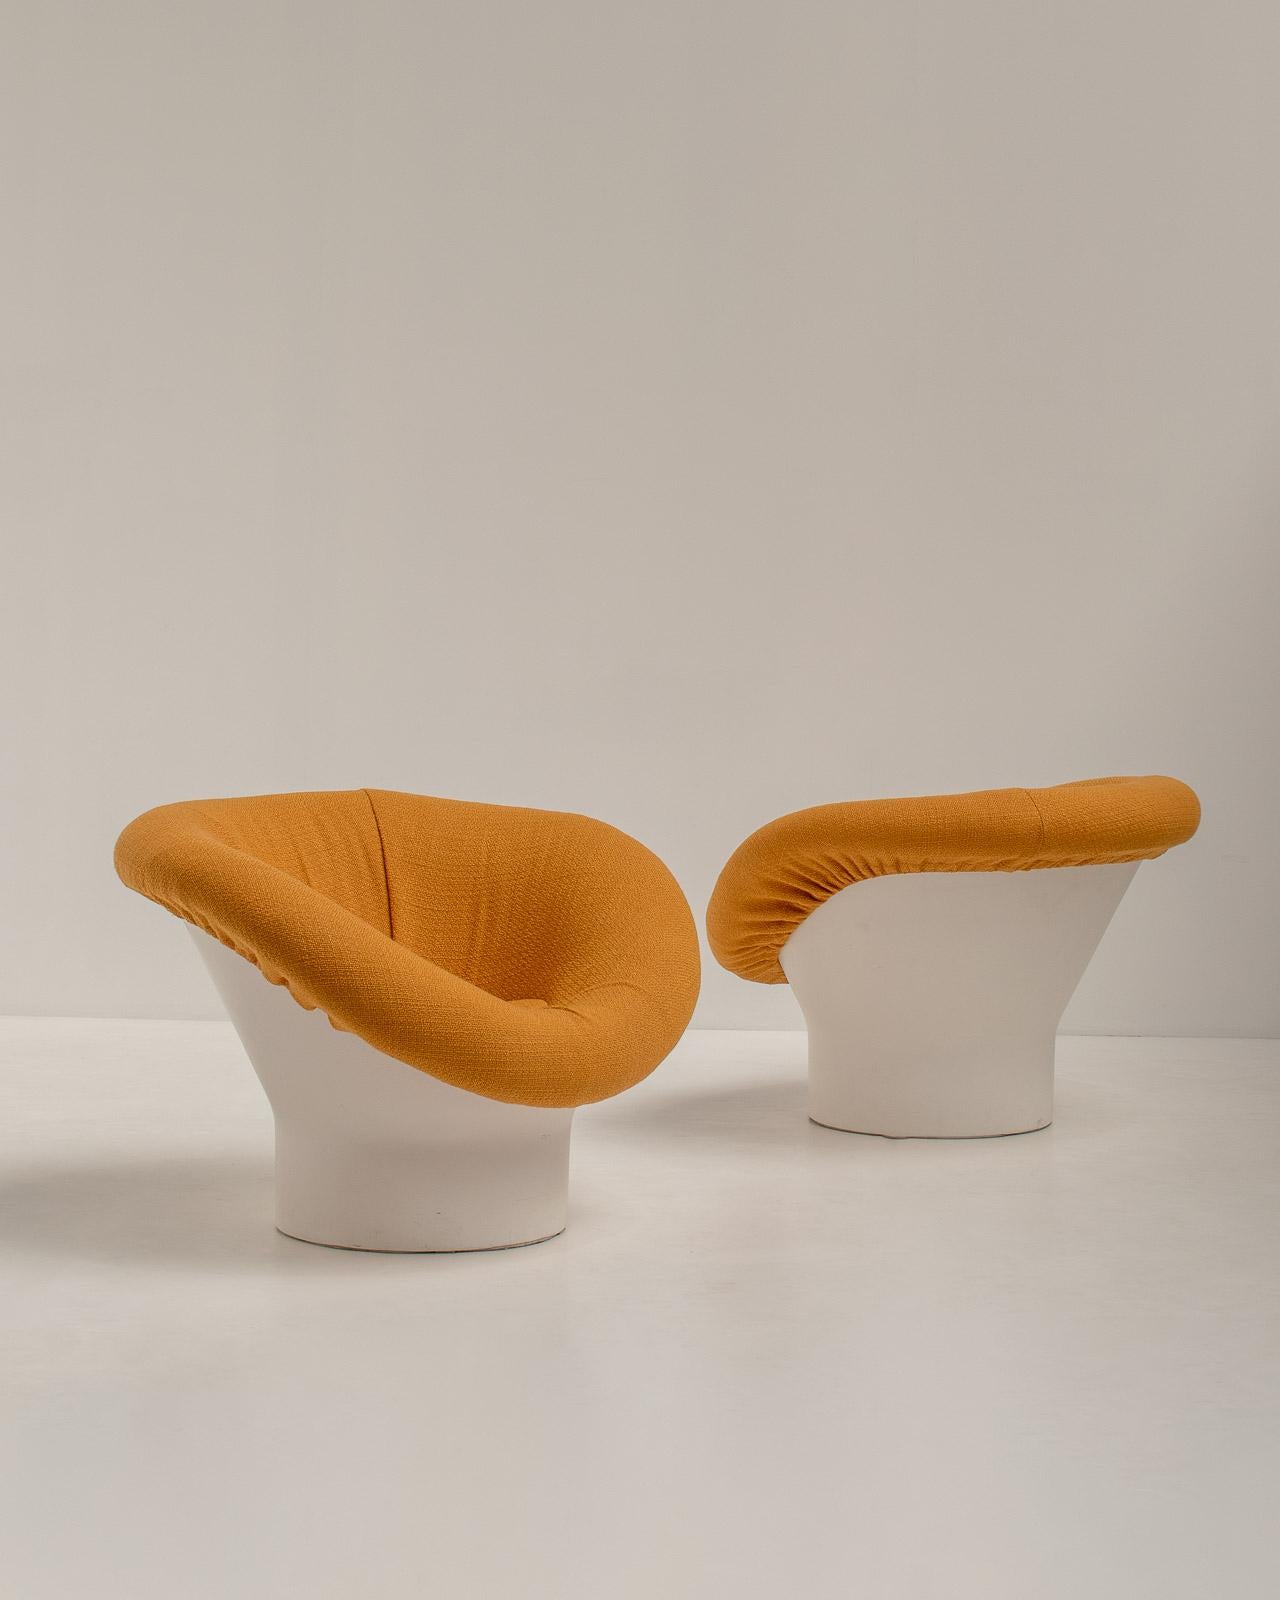 Pair of Krokus Lounge Chairs by Lennart Bender for Ulferts, Sweden 1960s For Sale 4